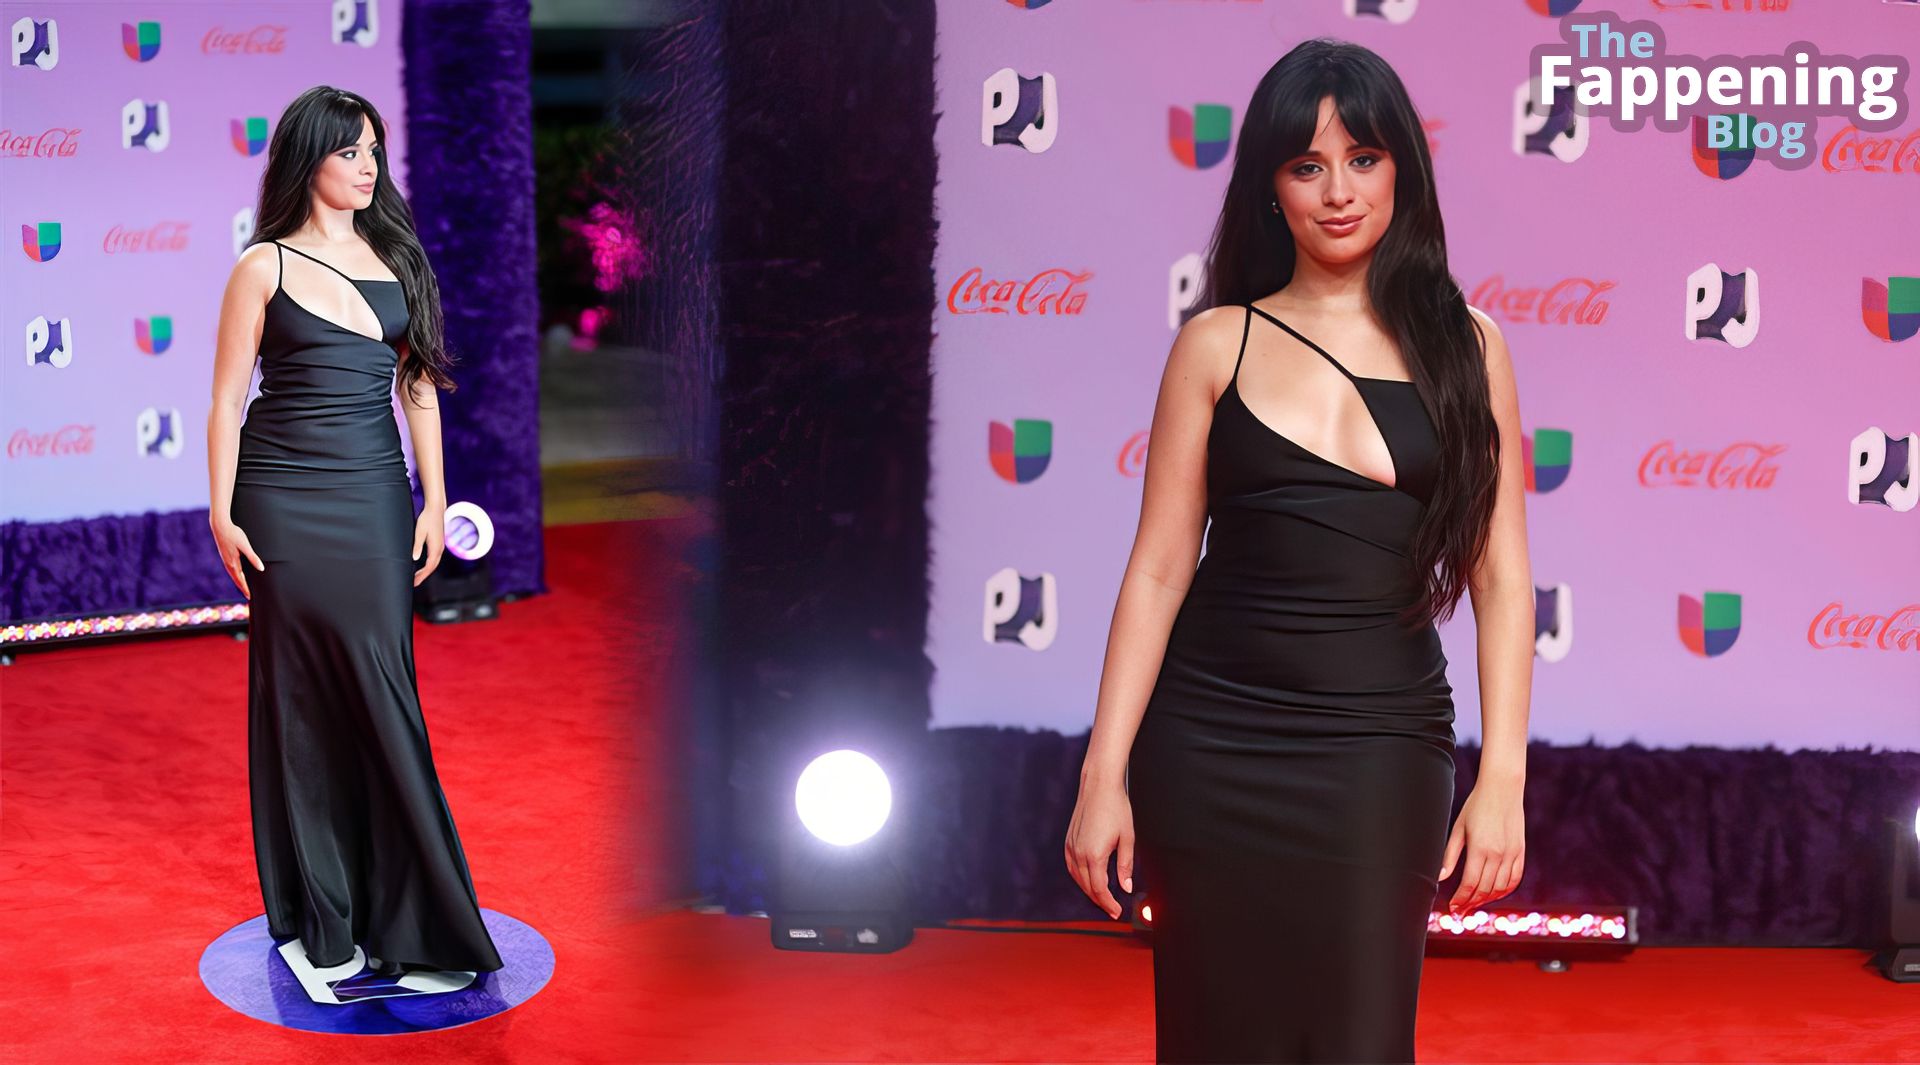 Camila-Cabello-Sexy-Cleavage-in-Black-Dress-2-thefappeningblog.com_.jpg